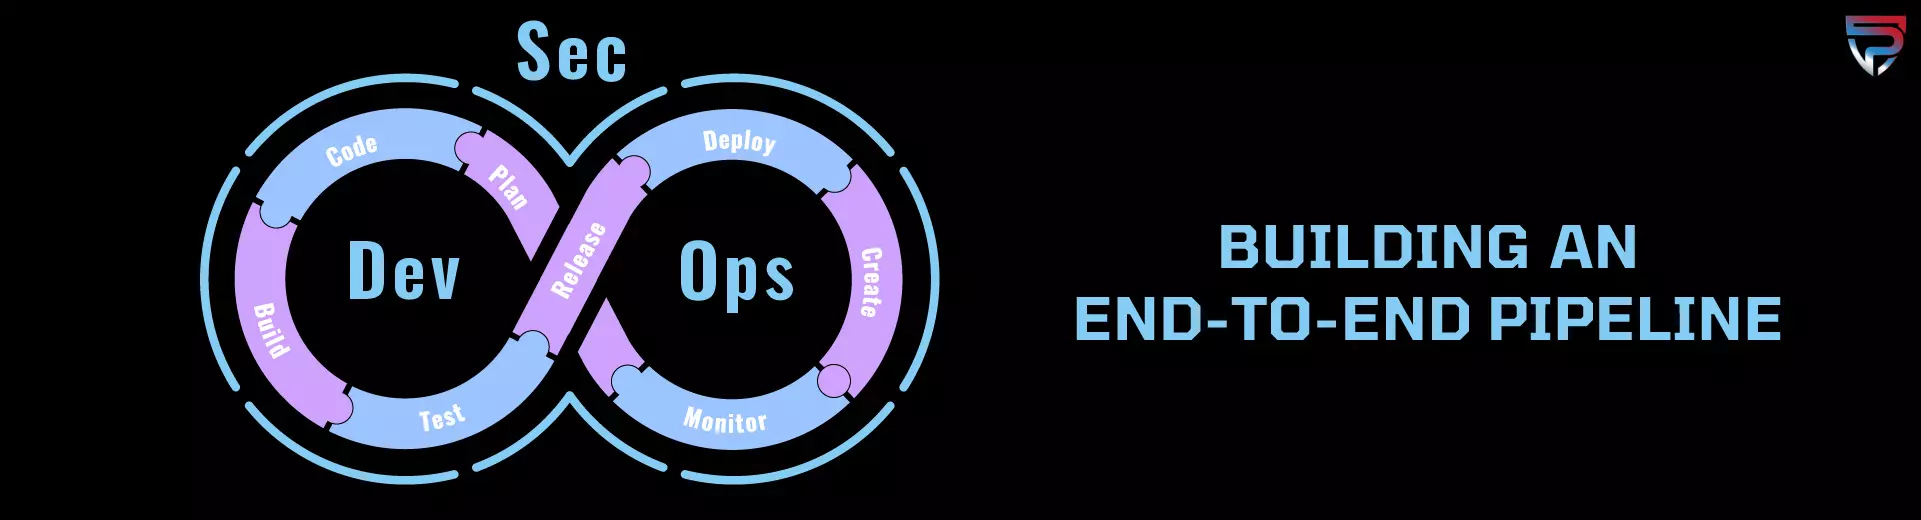 DevSecOps Lifecycle